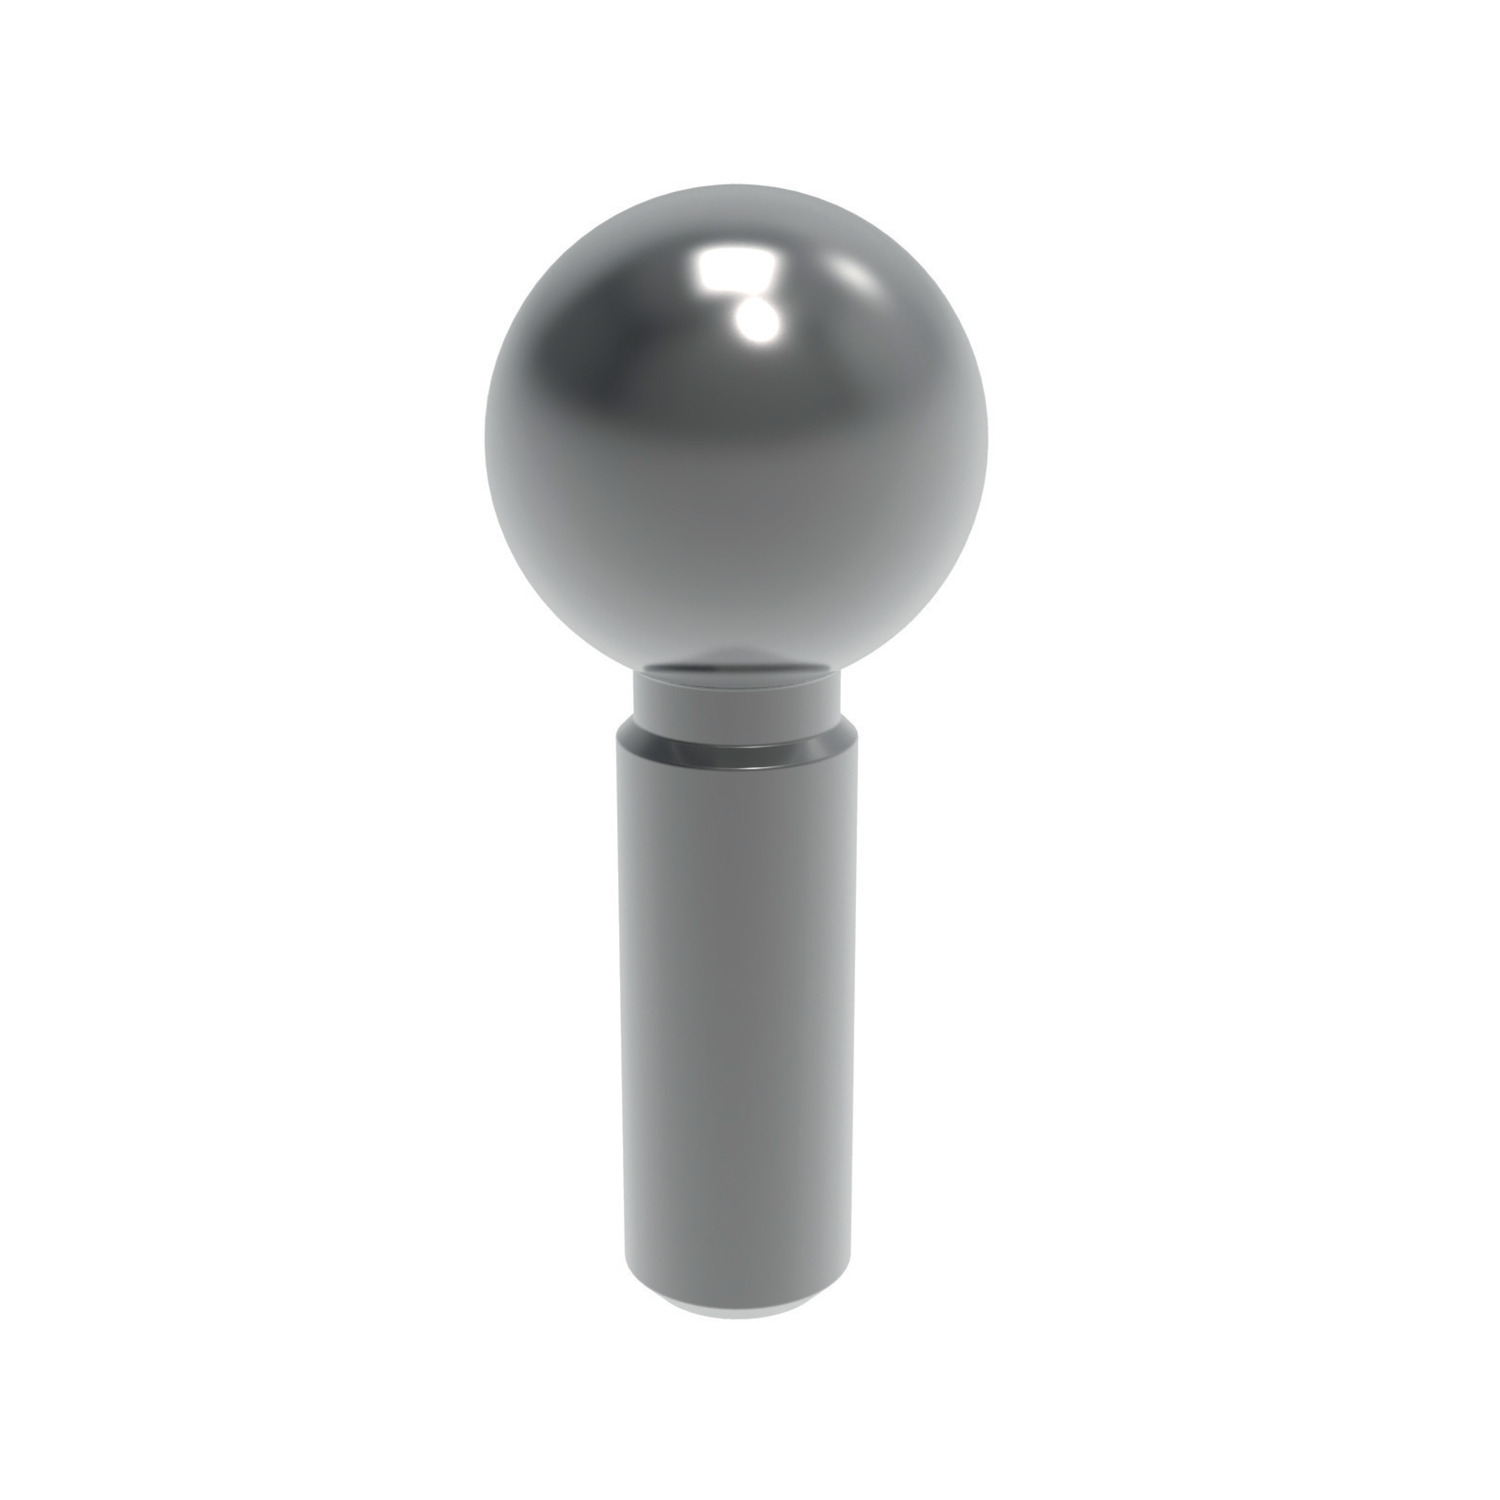 Product 20510, Tooling Balls - Imperial standard - one piece construction / 